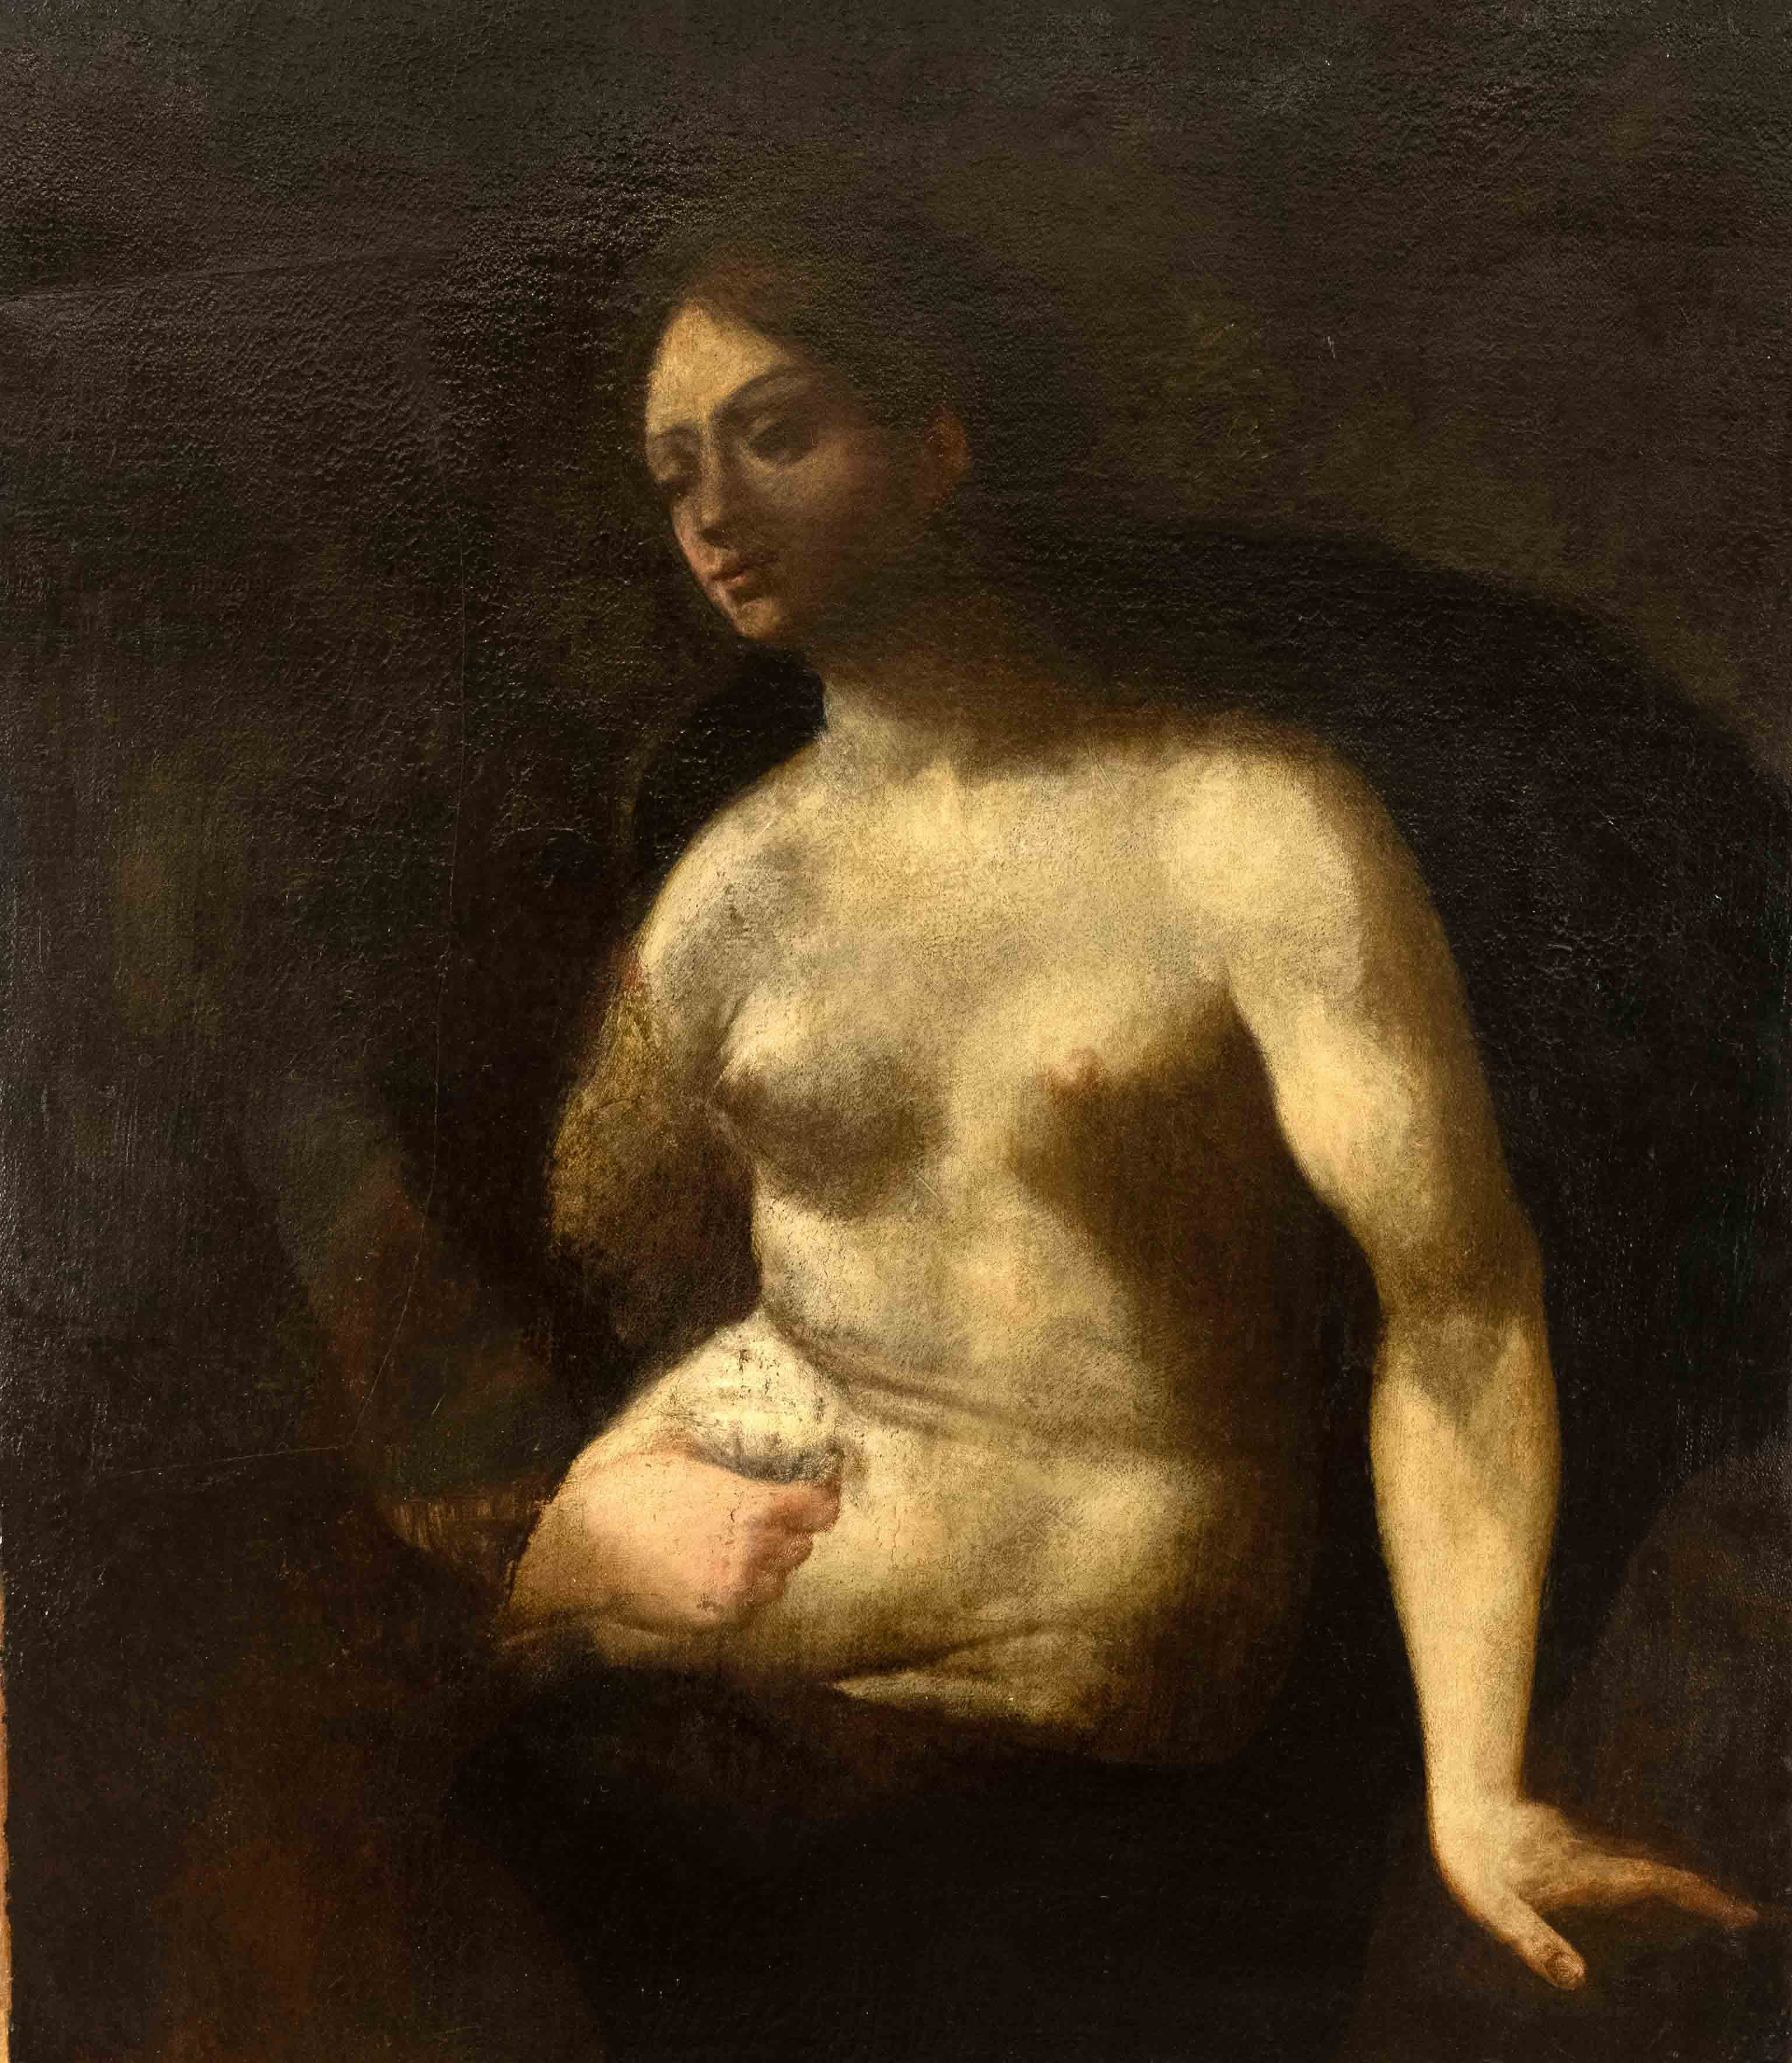 Italian painter of the 17th century, female nude with fragmentary figure at the left margin, oil